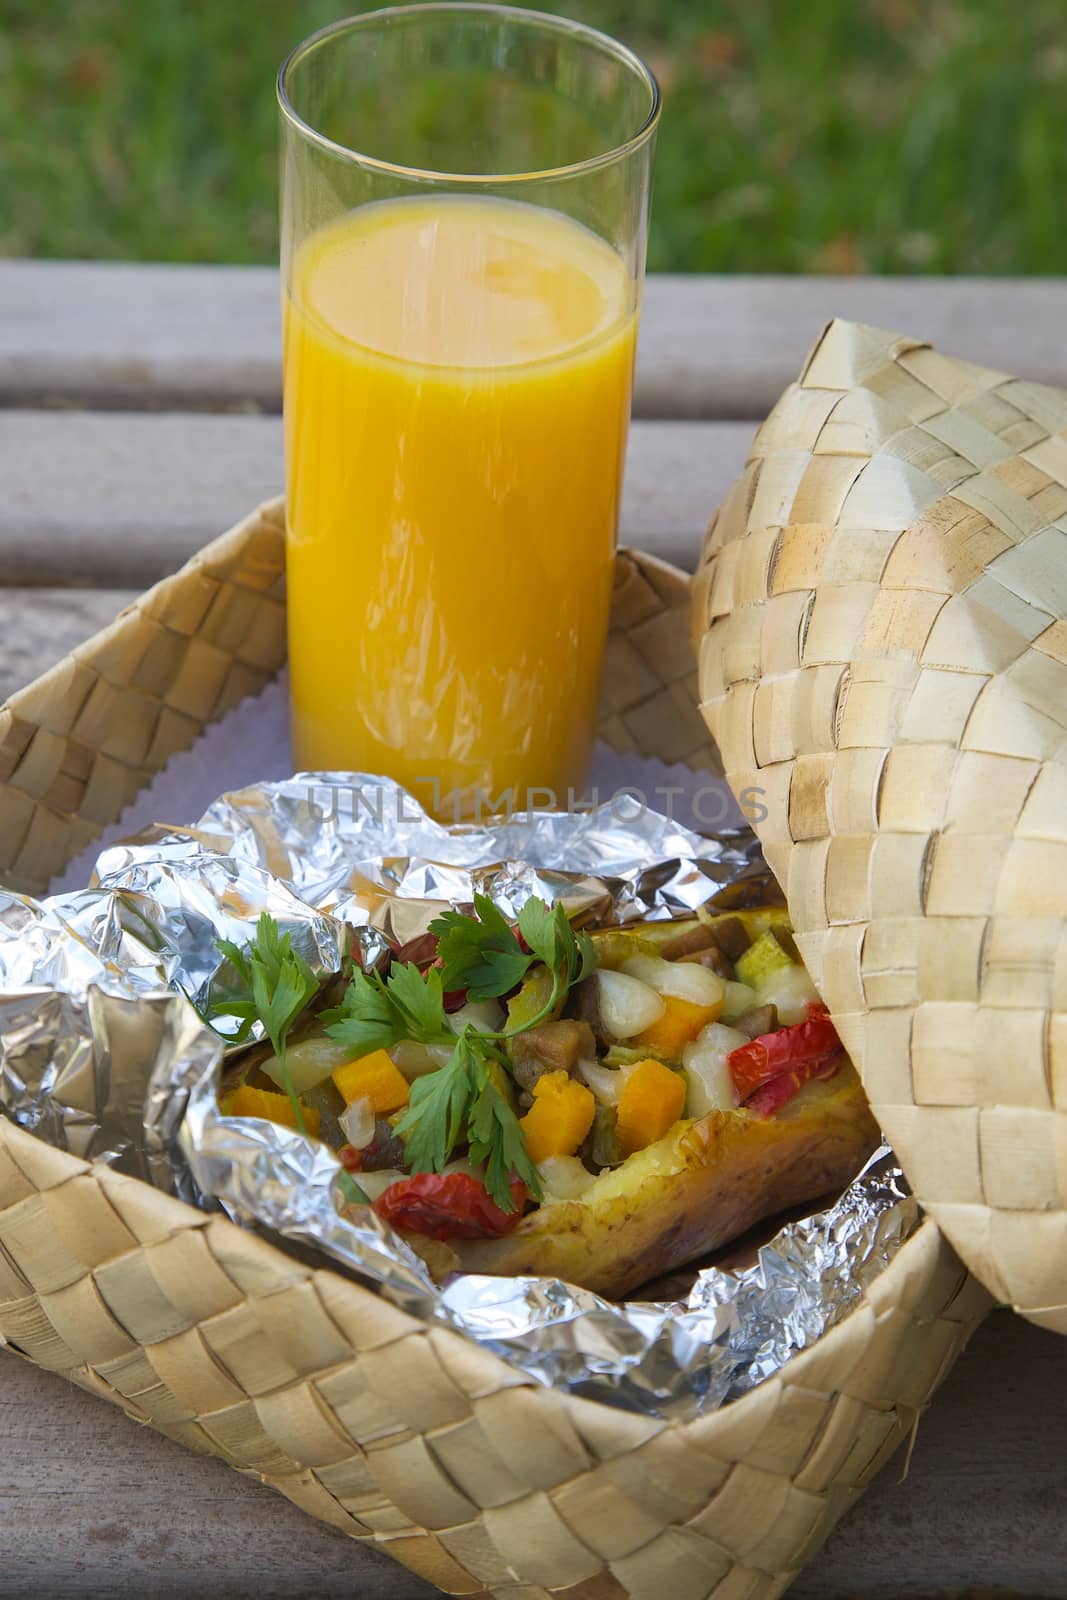 Open-air lunch for a vegetarian- potato baked with vegetables and cheese in an aluminium foil and a glass of fresh orange juice. Dish is hidden in the woven birch basket